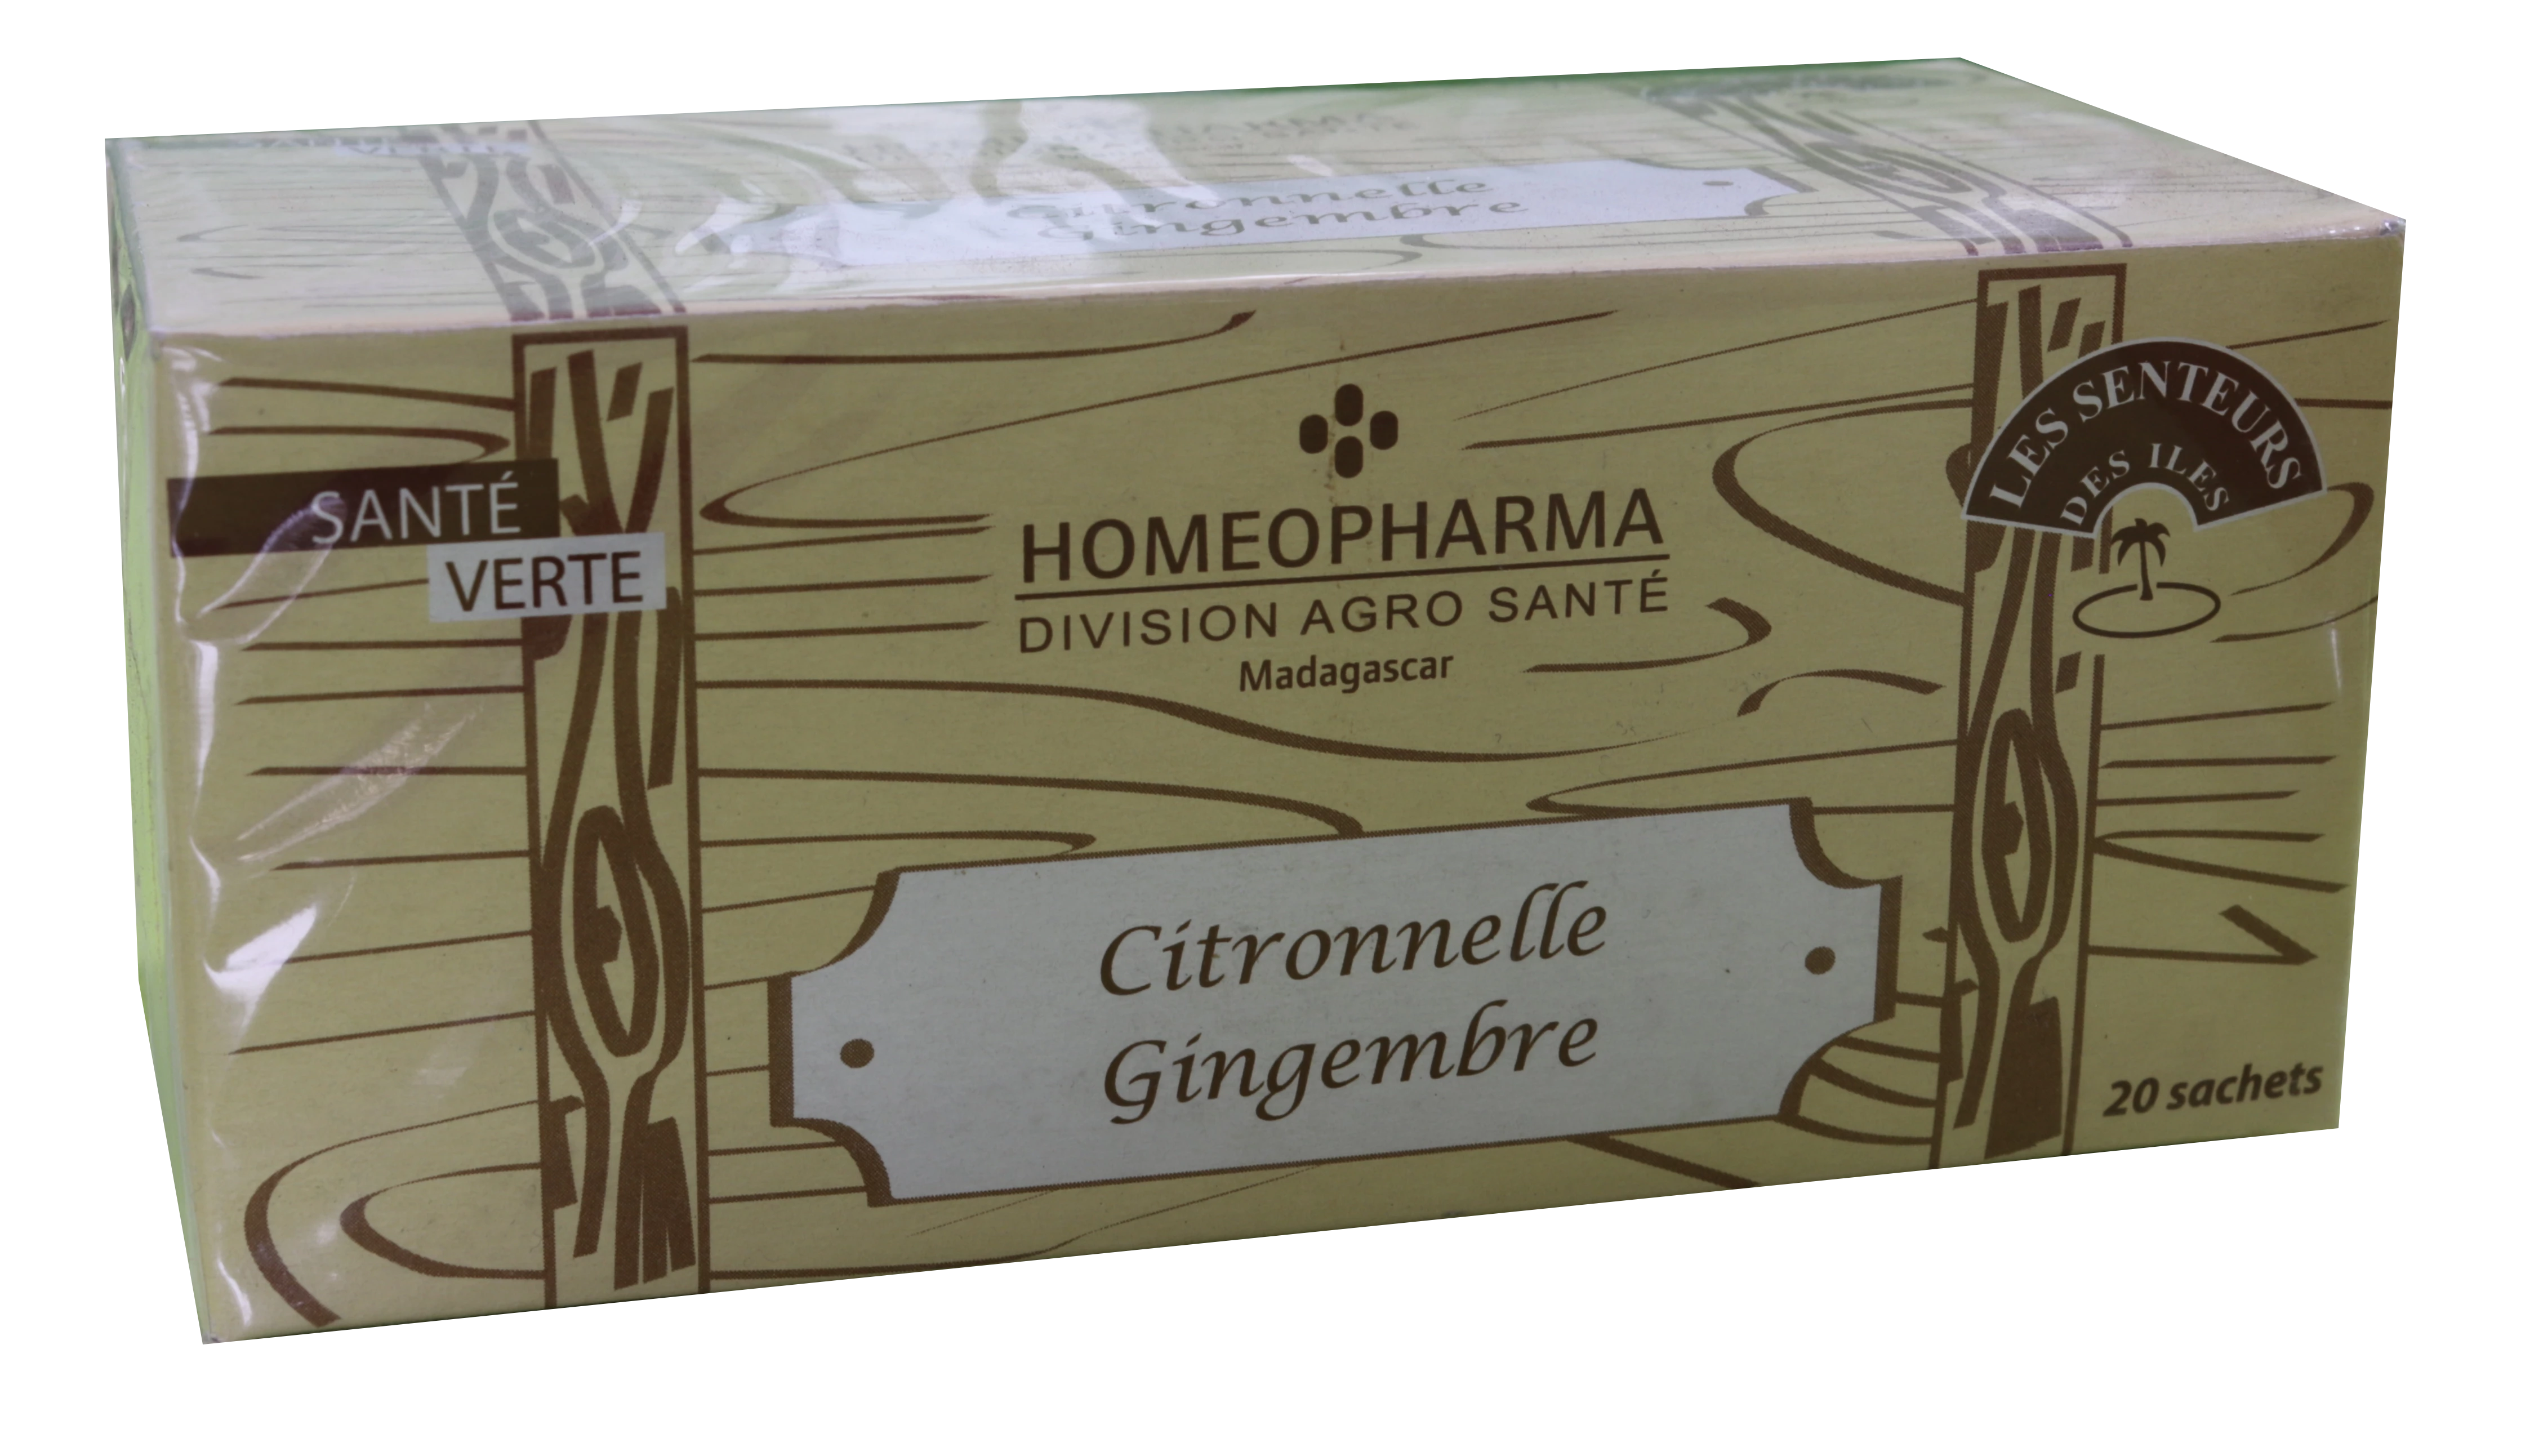 Herbal teas - Infusions Scent of the Islands range Lemongrass-ginger Box 20 Infusettes - HOMEOPHARMA